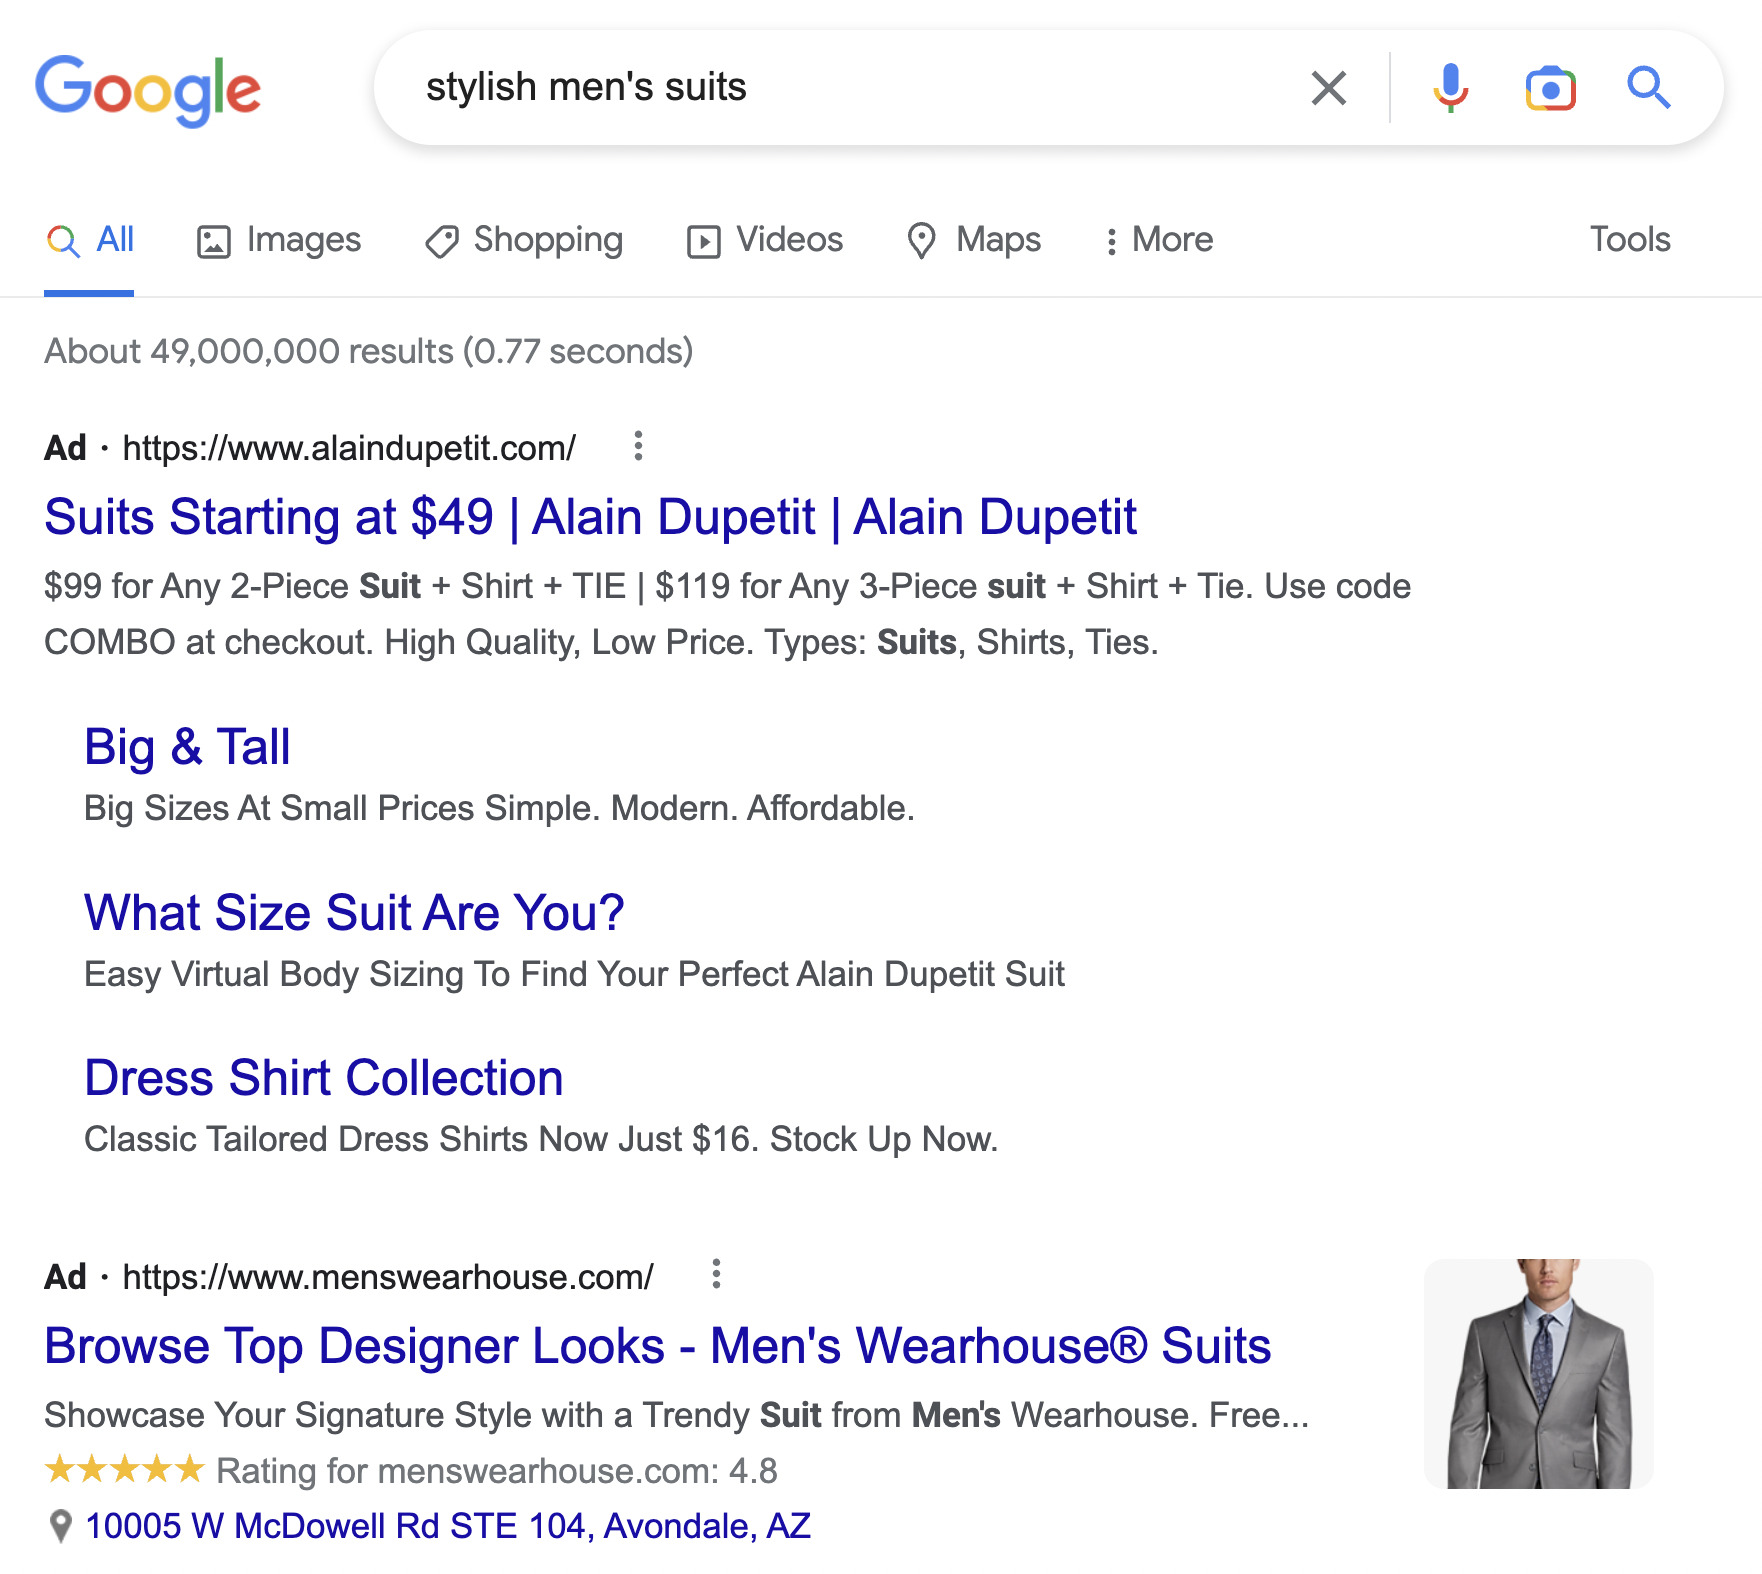 Google search results for "stylish men 's suits"